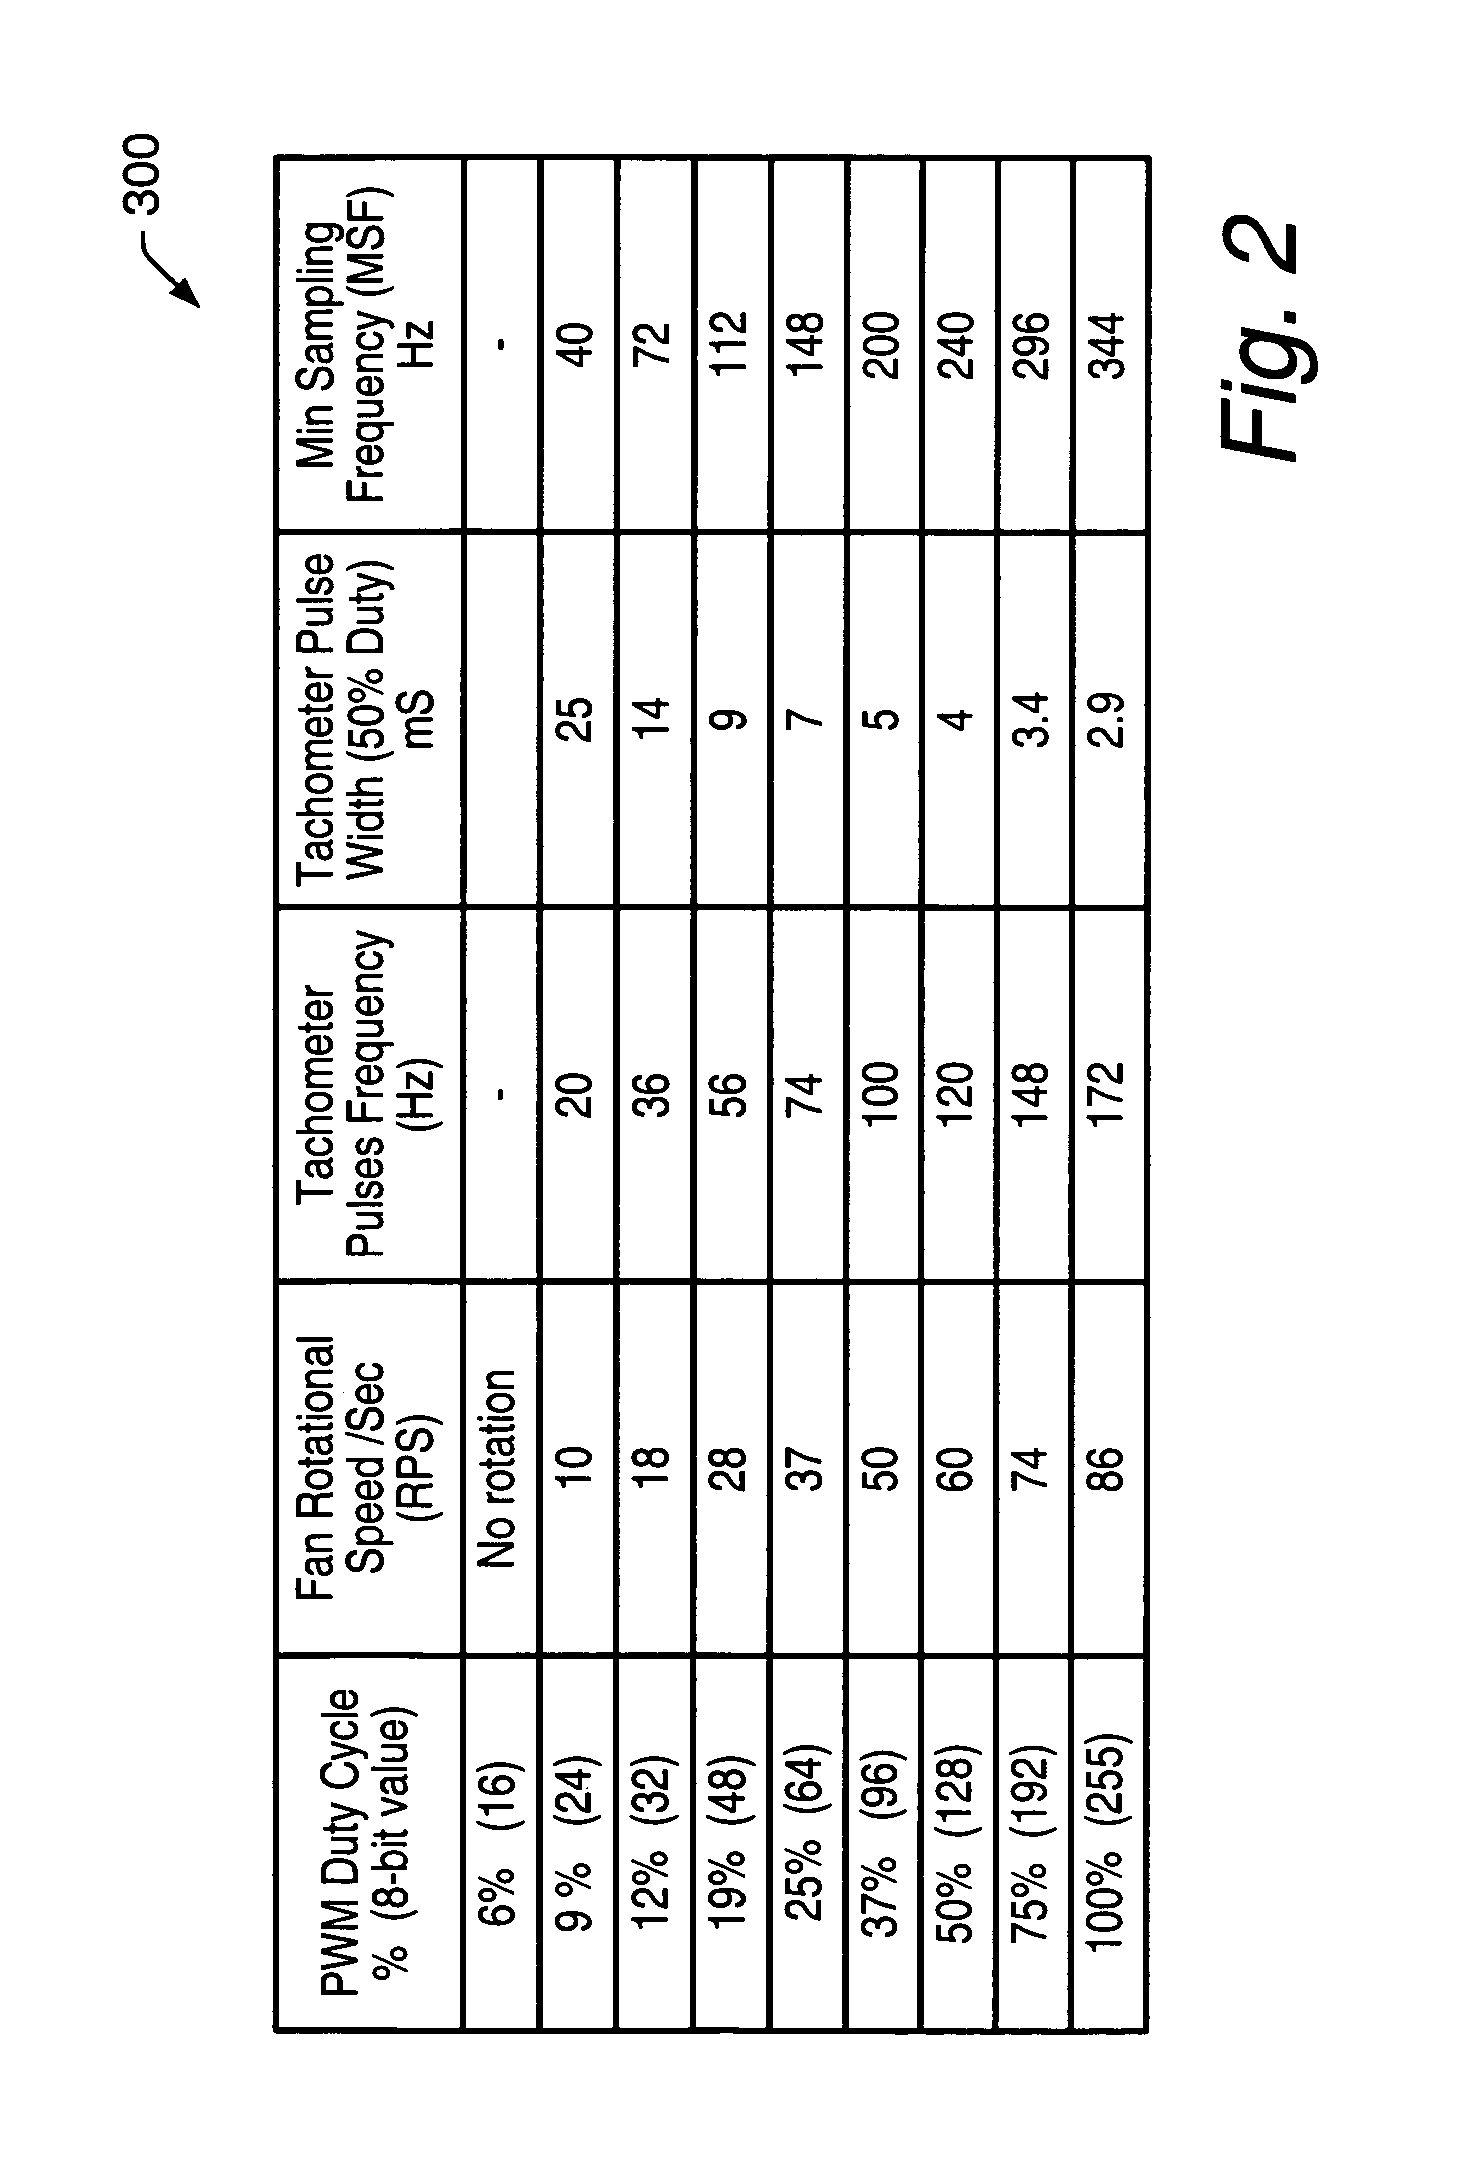 Method and apparatus for accurate fan tachometer readings of PWM fans with different speeds